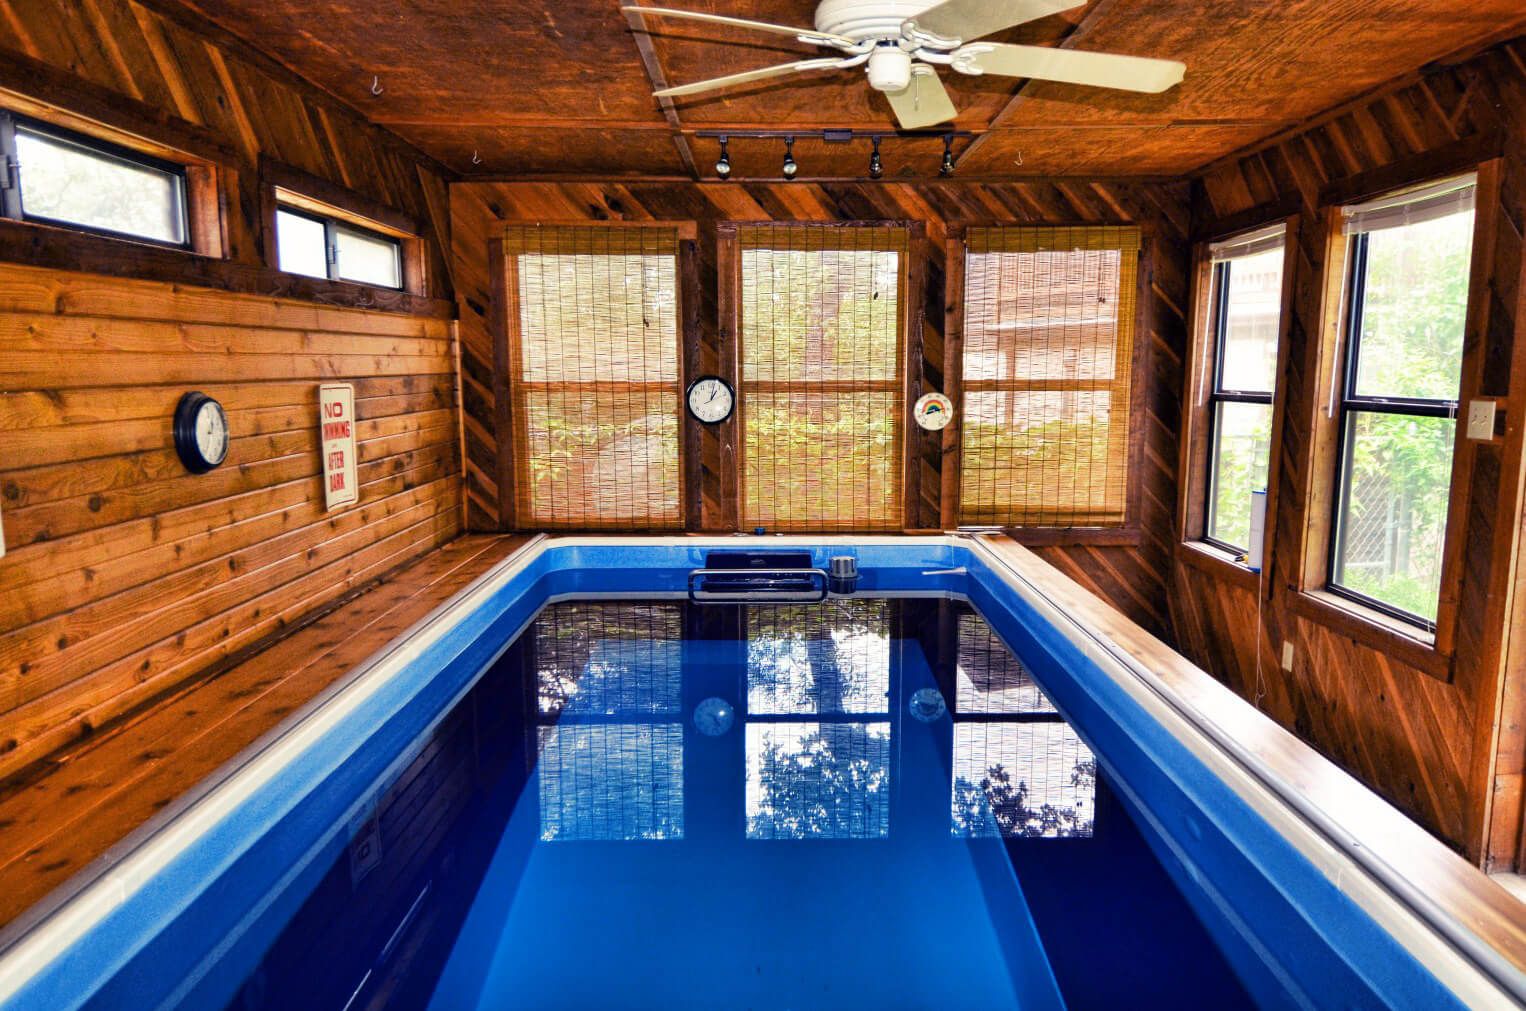 The Endless Pool in Pat Segar's pool house gets daily use for aquatic therapy